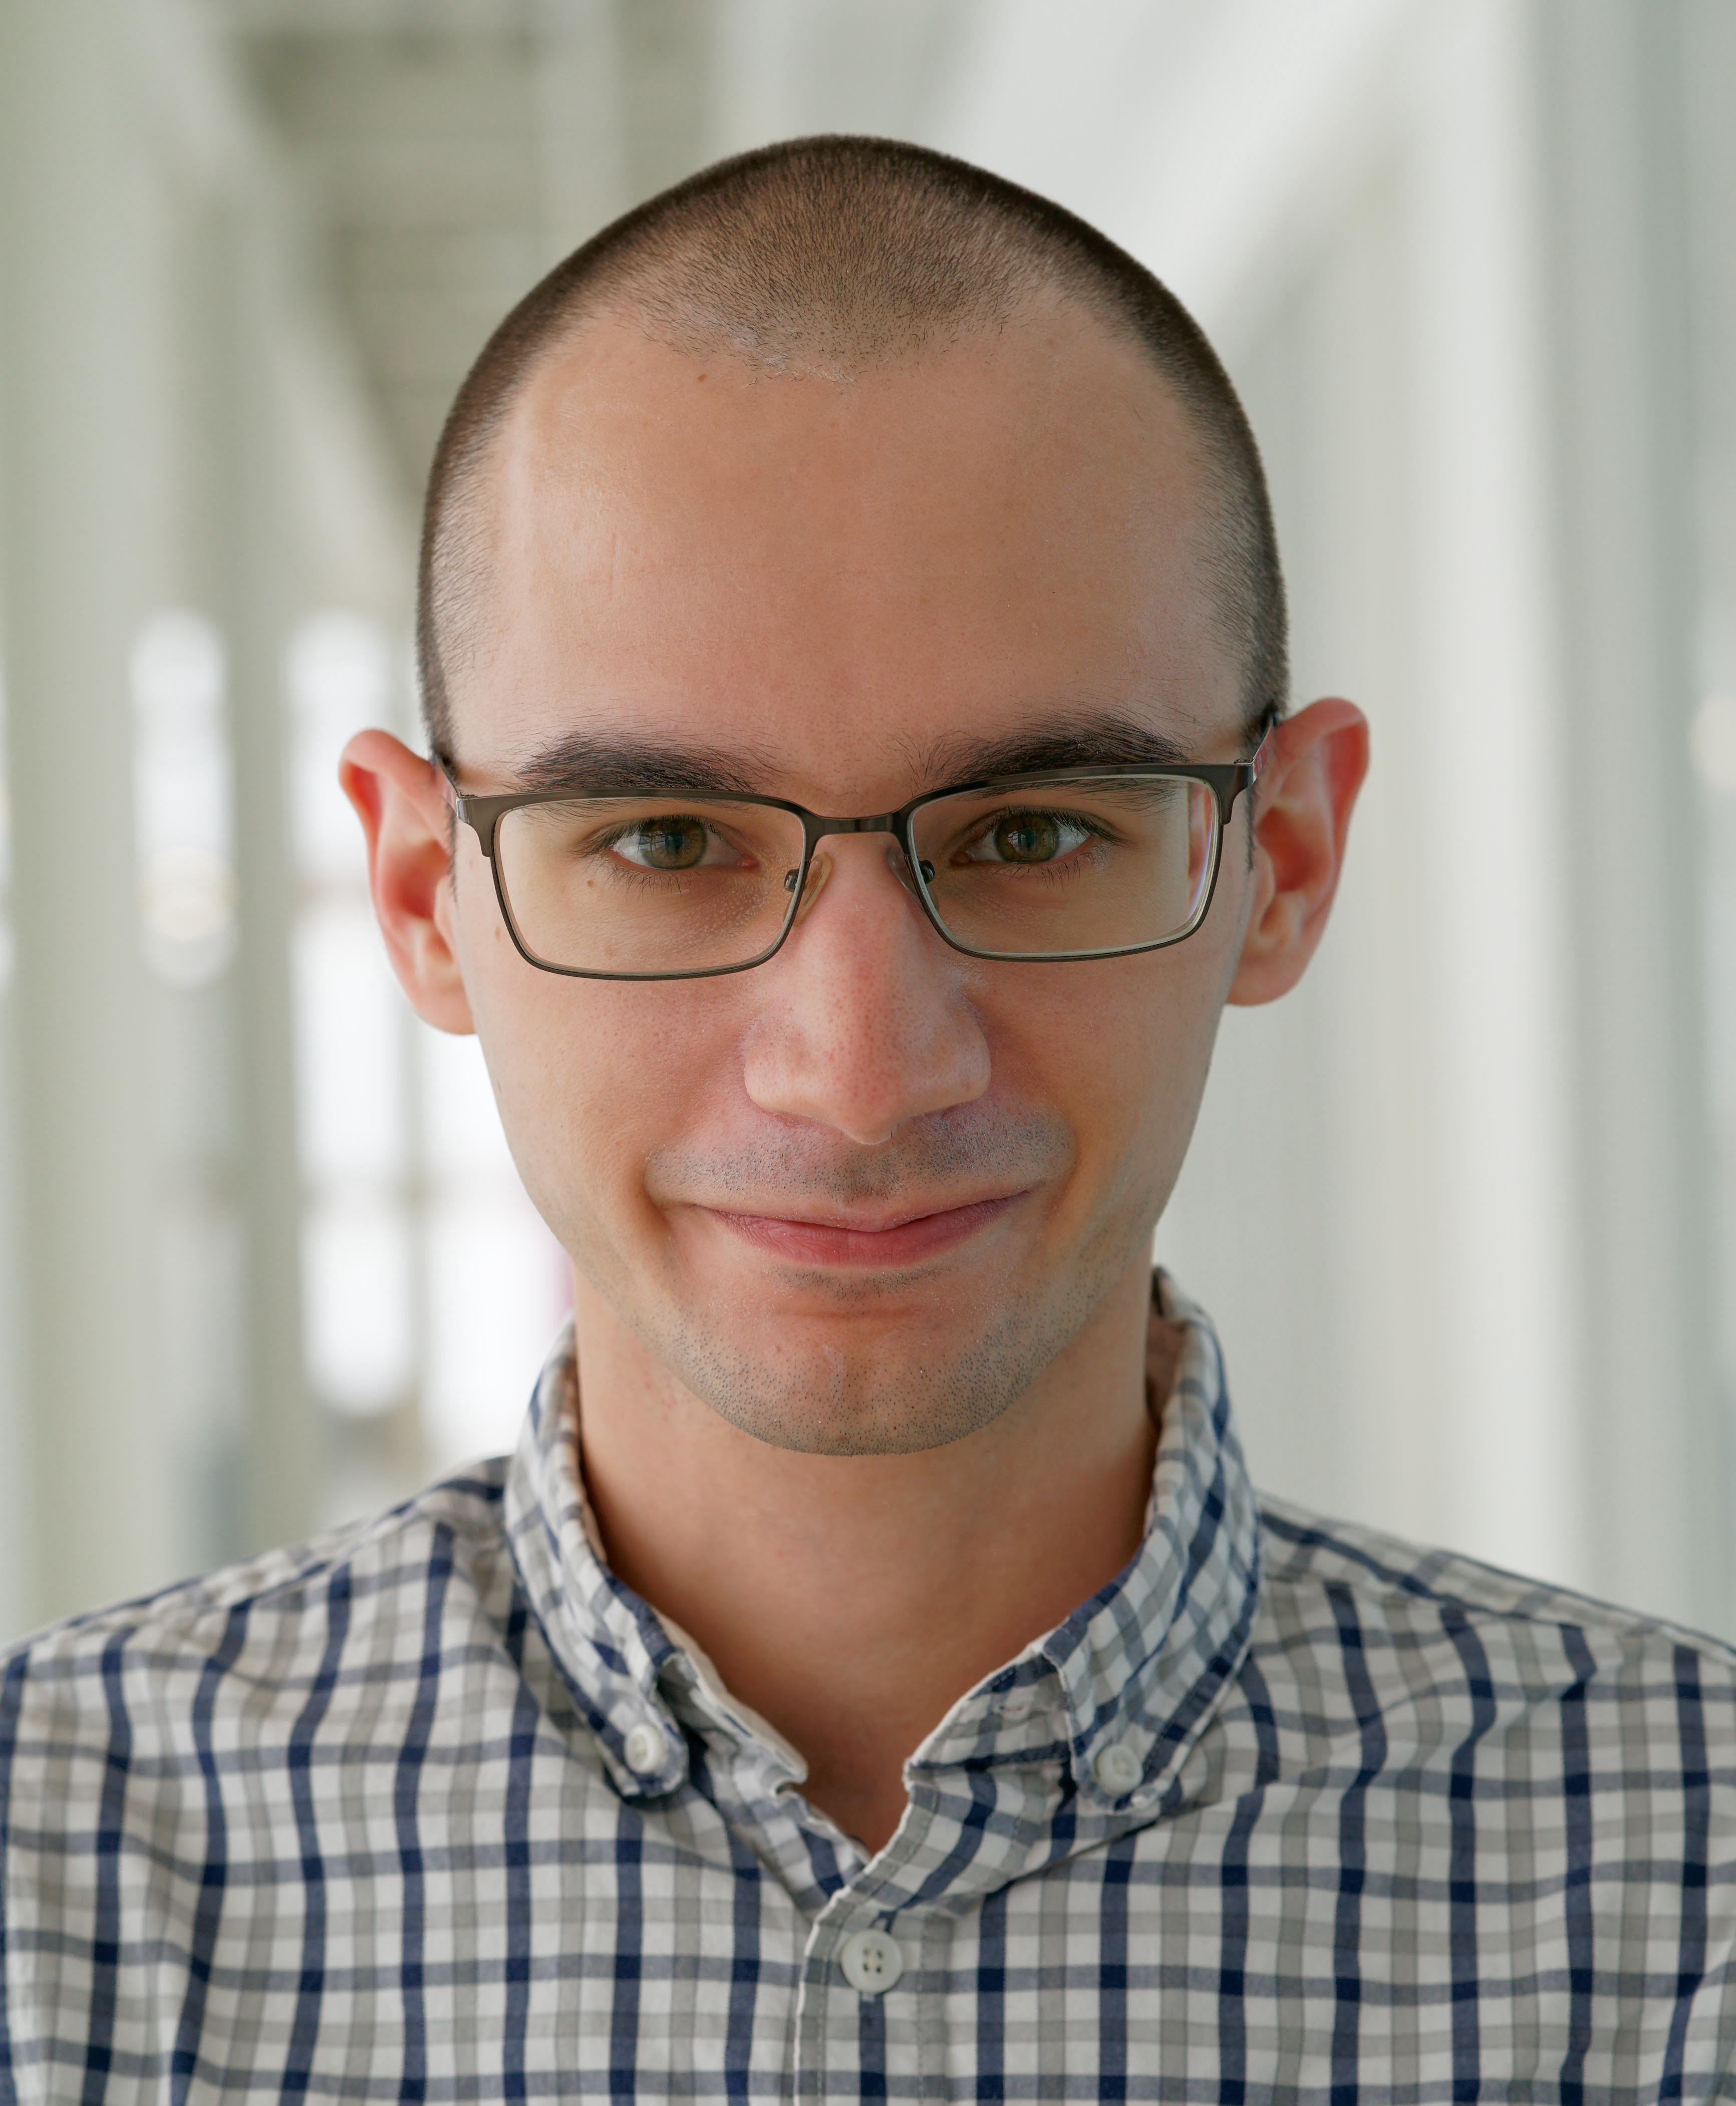 A headshot of Noah, looking into the camera and smiling slightly. He has a shaved head and glasses, and is wearing a striped button-down shirt.